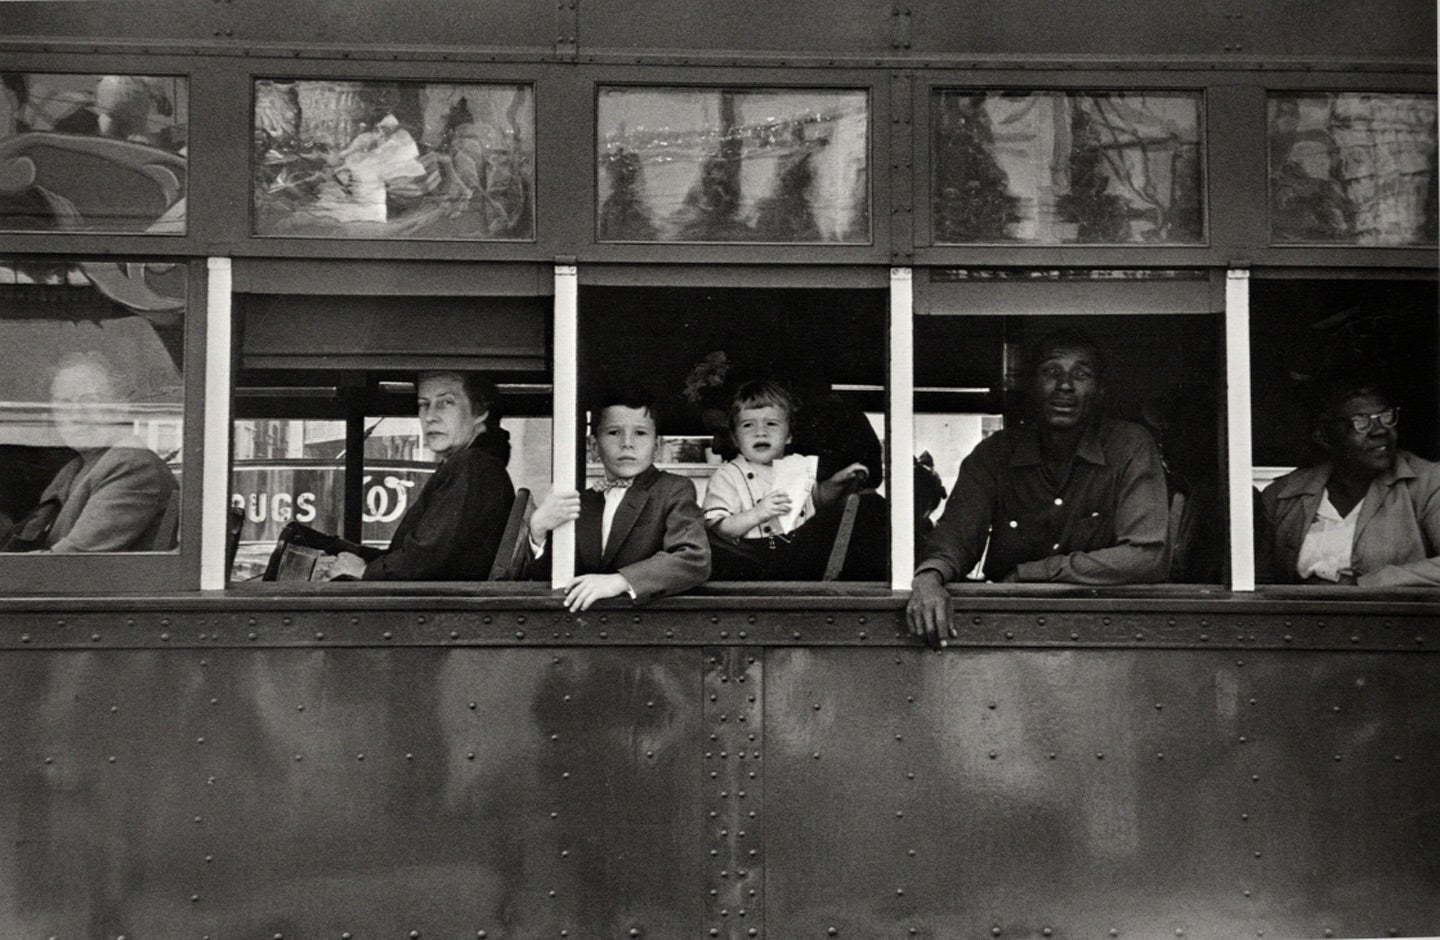 Robert Frank: Moving Out